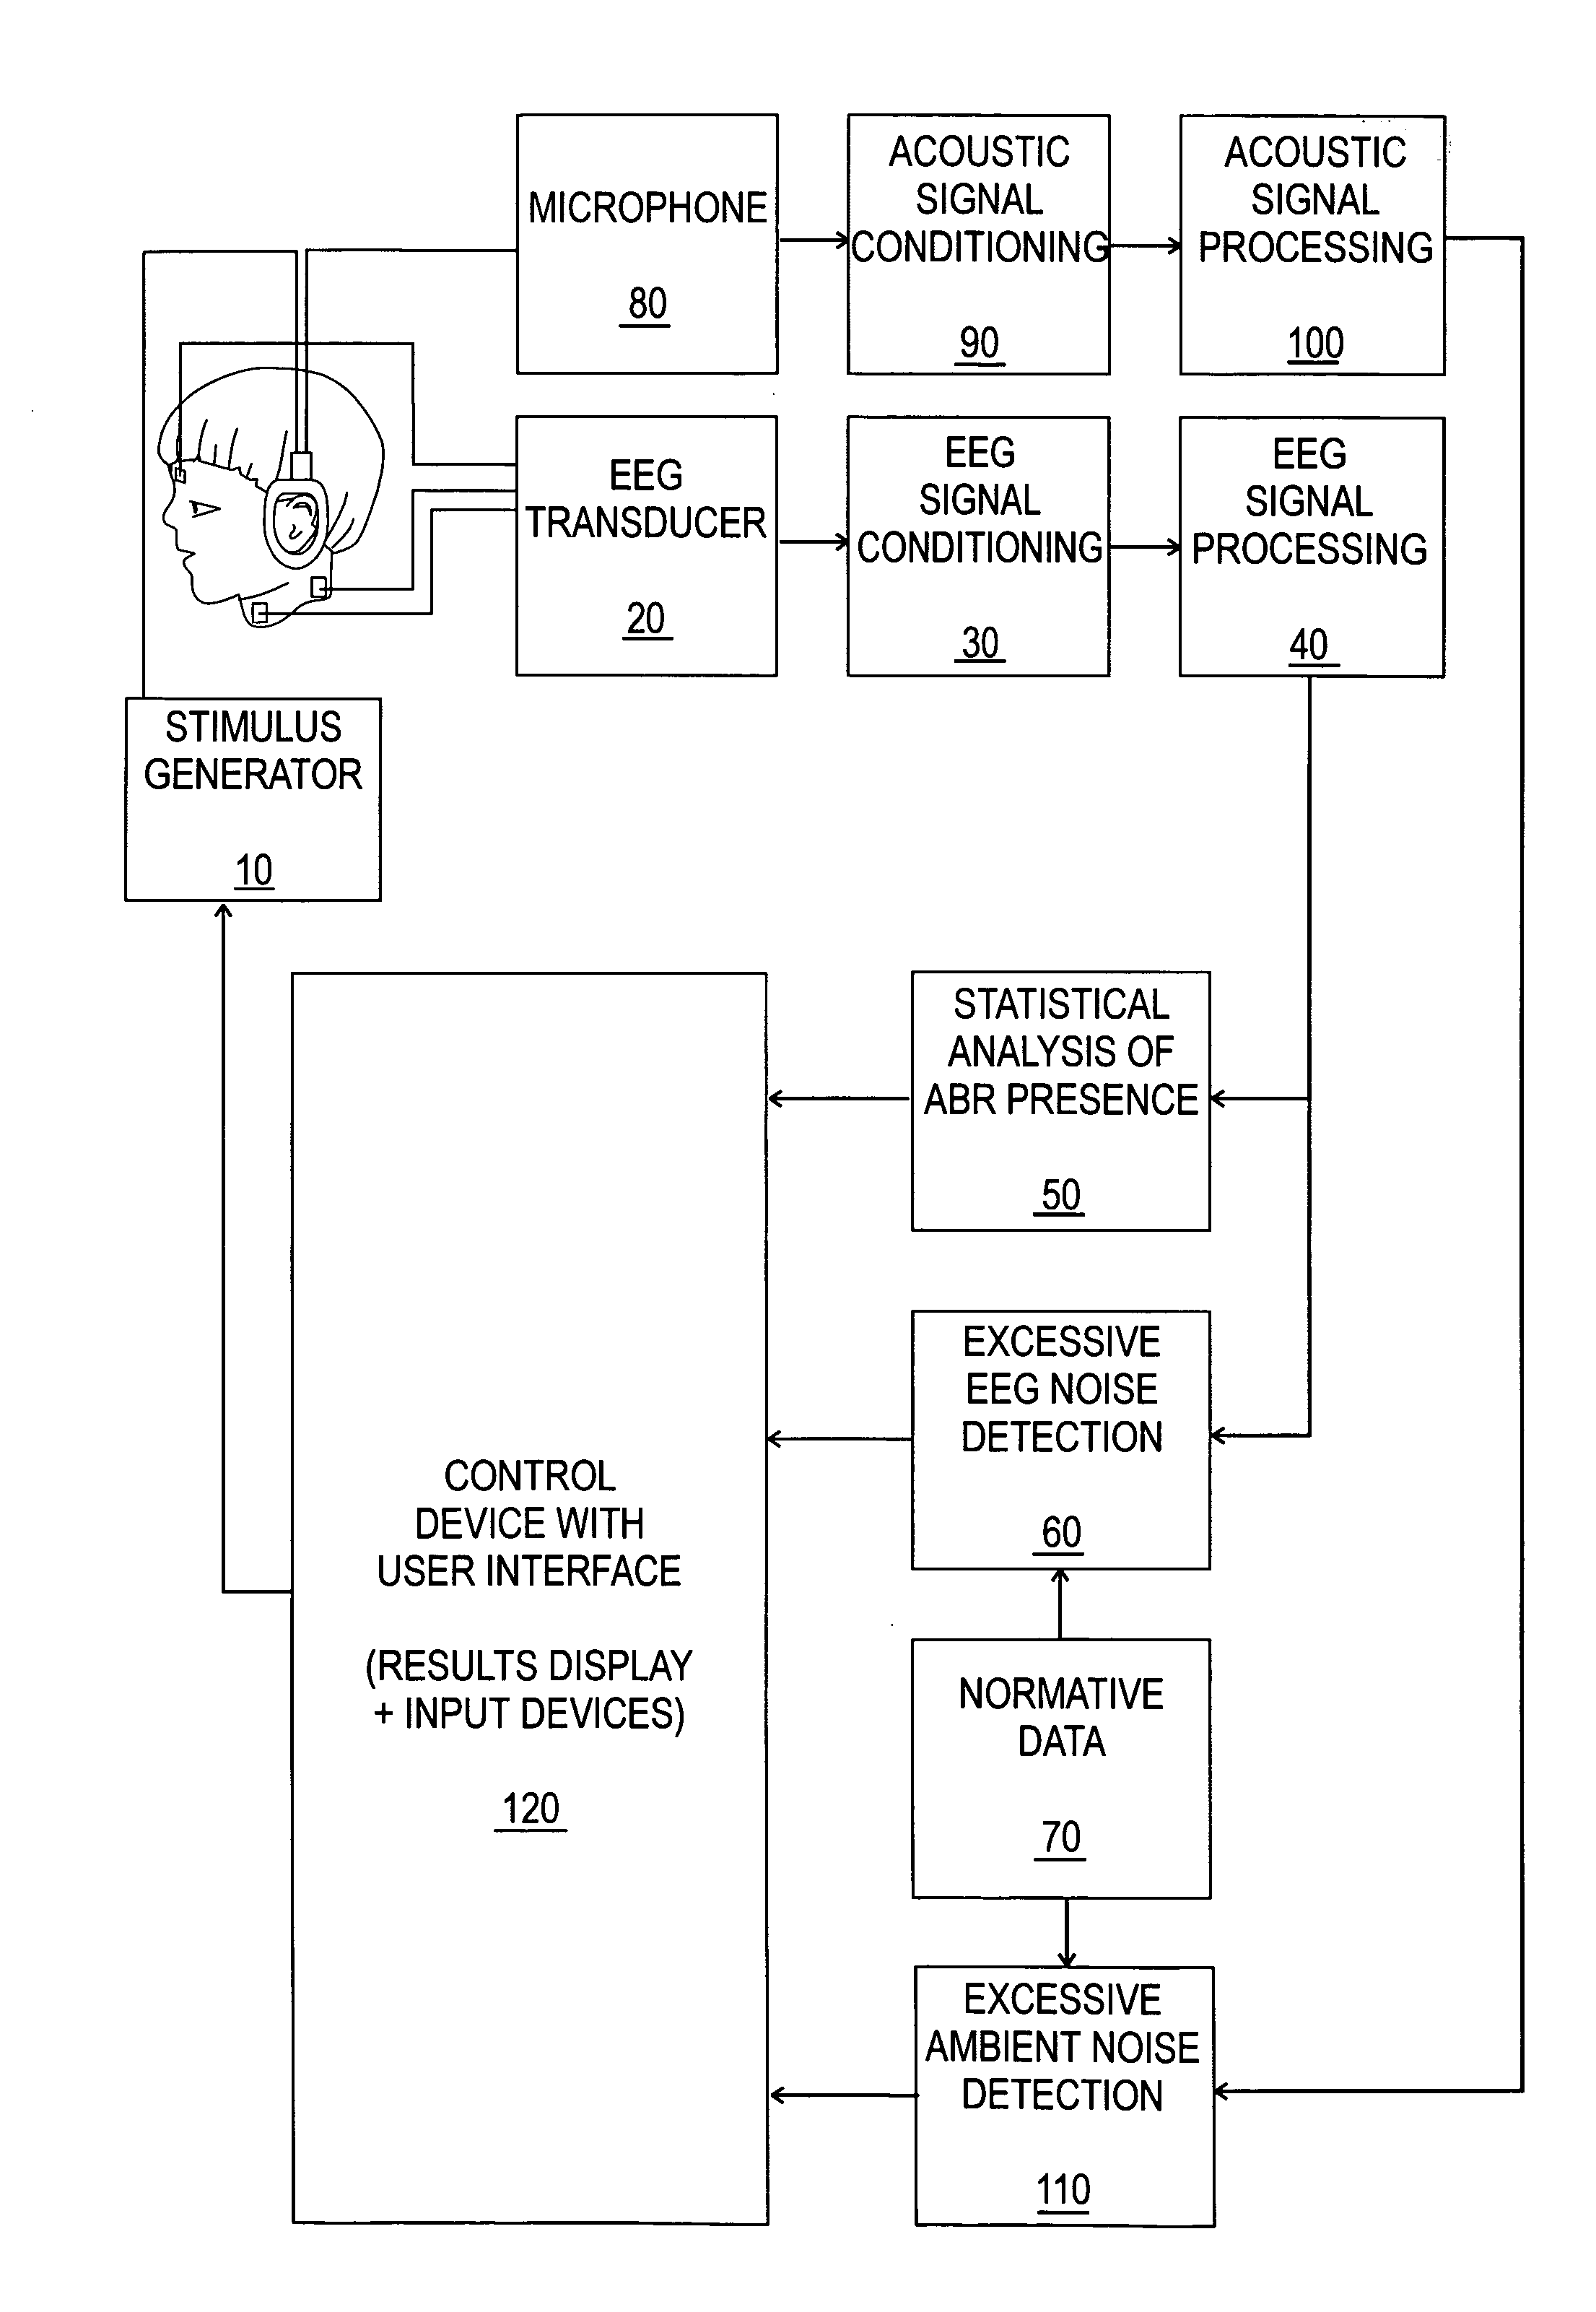 Hearing evaluation device with noise detection and evaluation capability